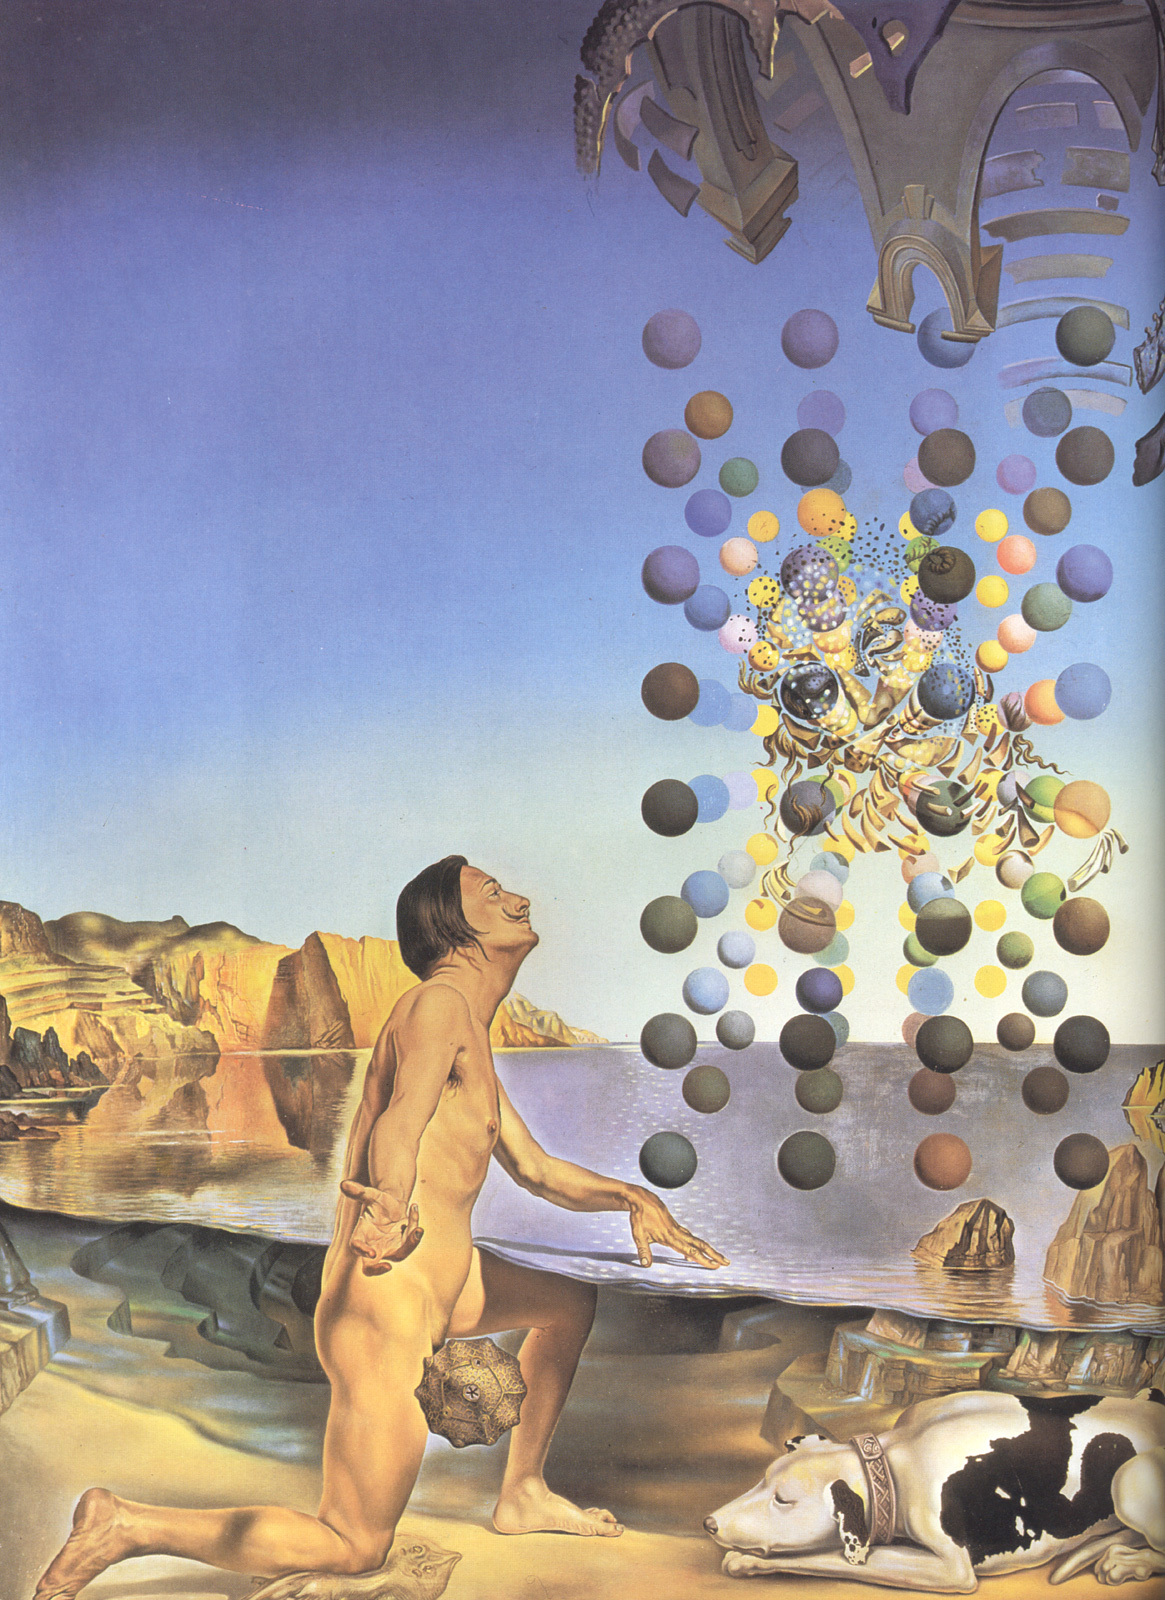 Dali Nude, in Contemplation Before the Five Regular Bodies (1954).